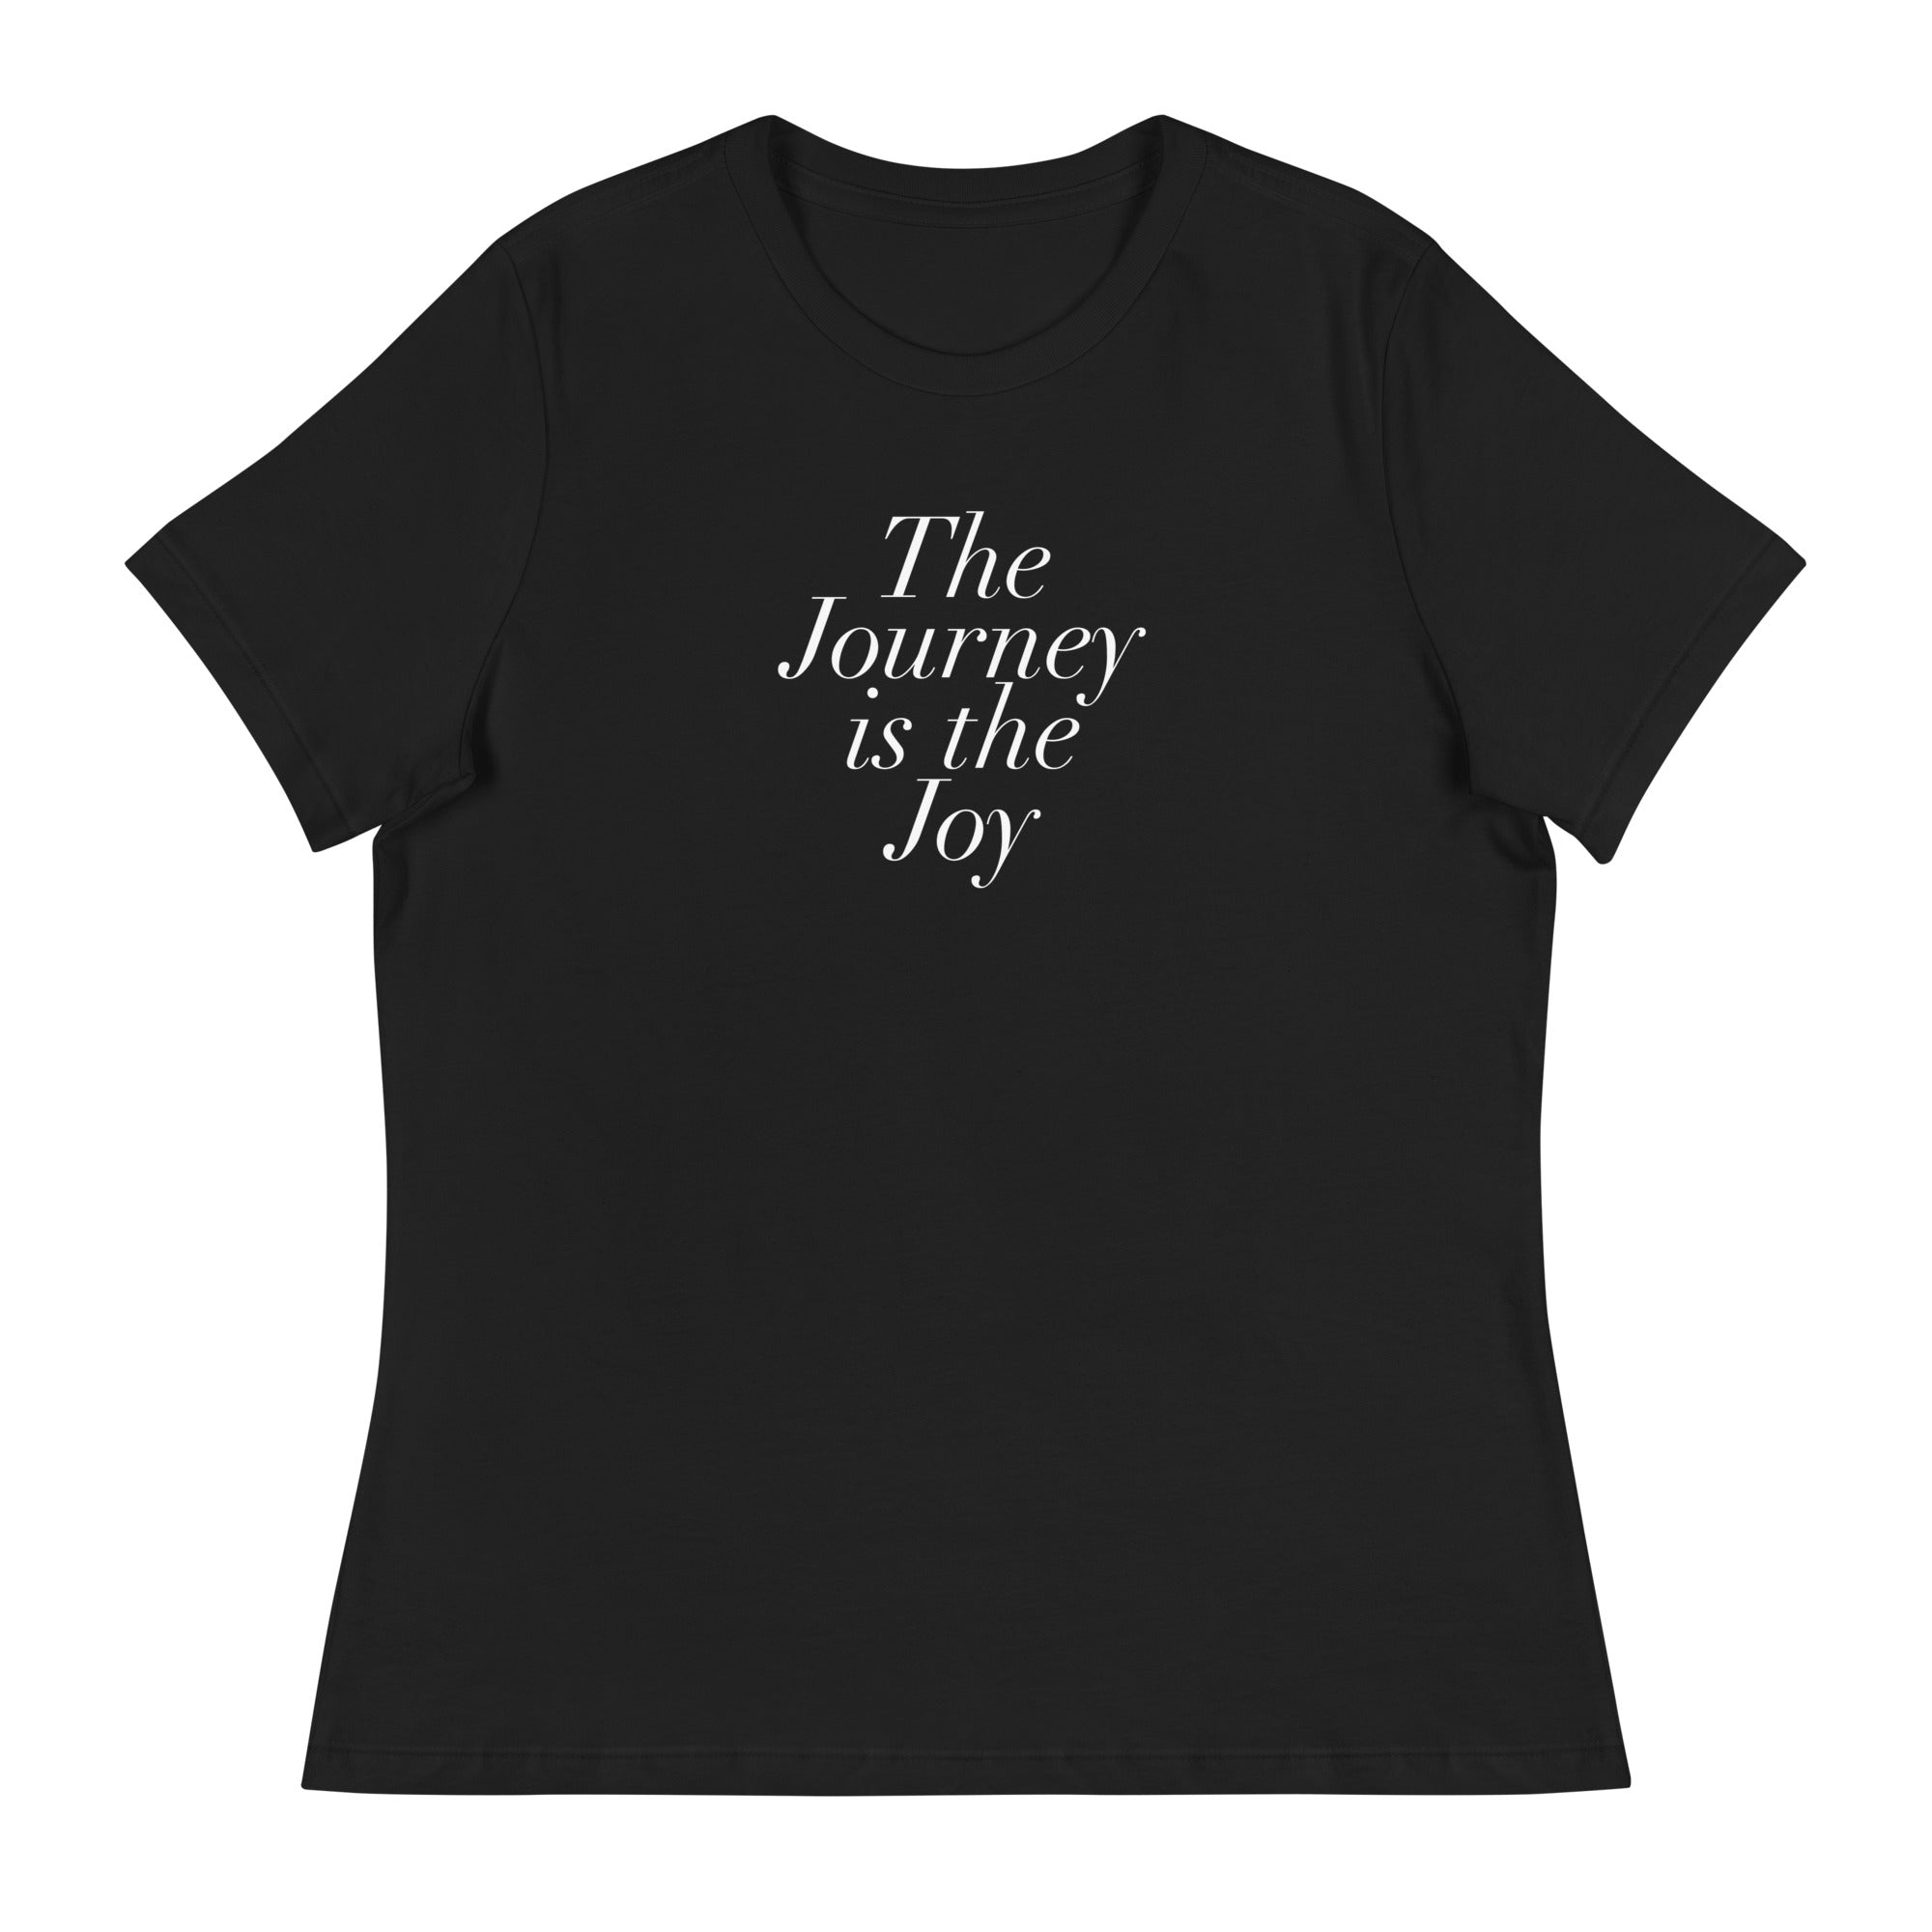 The Journey is the Joy - Women's Relaxed T-Shirt in Navy, Black, Dark Heather Grey and Heather Mauve